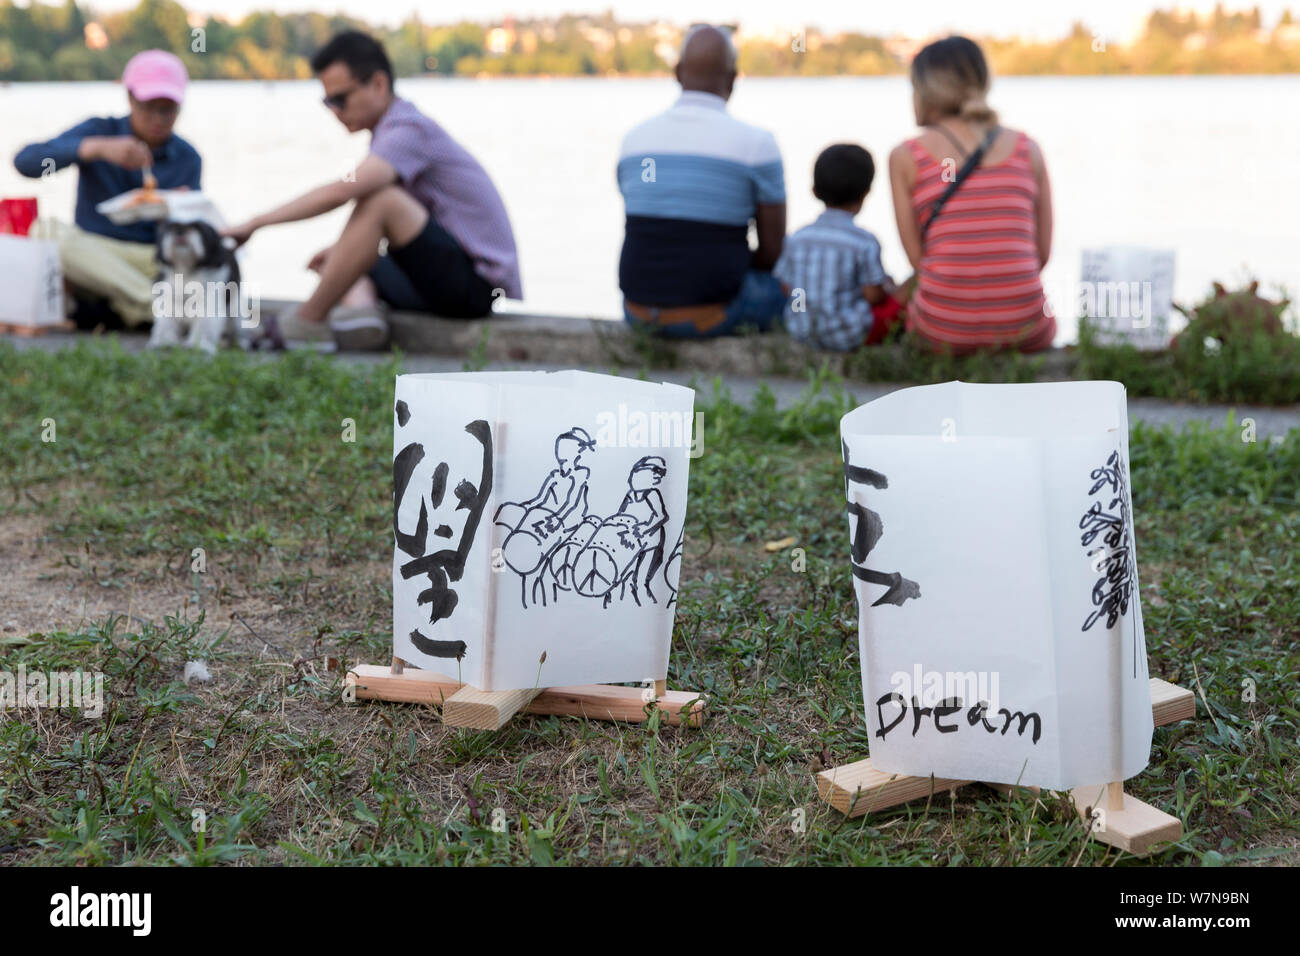 Participants gather by the lake at the Toro Nagashi Lantern Floating Ceremony in Seattle, Washington on August 6, 2019. “From Hiroshima To Hope” is held in remembrance of atomic bomb victims on the anniversary of the bombing of Hiroshima, Japan. The ceremony, organized by a collation of peace, religious, civil liberties and cultural heritage organizations, honors victims of the bombings of Hiroshima and Nagasaki, and all victims of violence. It is an adaptation of an ancient Japanese Buddhist ritual, the Toro Nagashi, in which lanterns representing the souls of the dead are floated out to sea Stock Photo